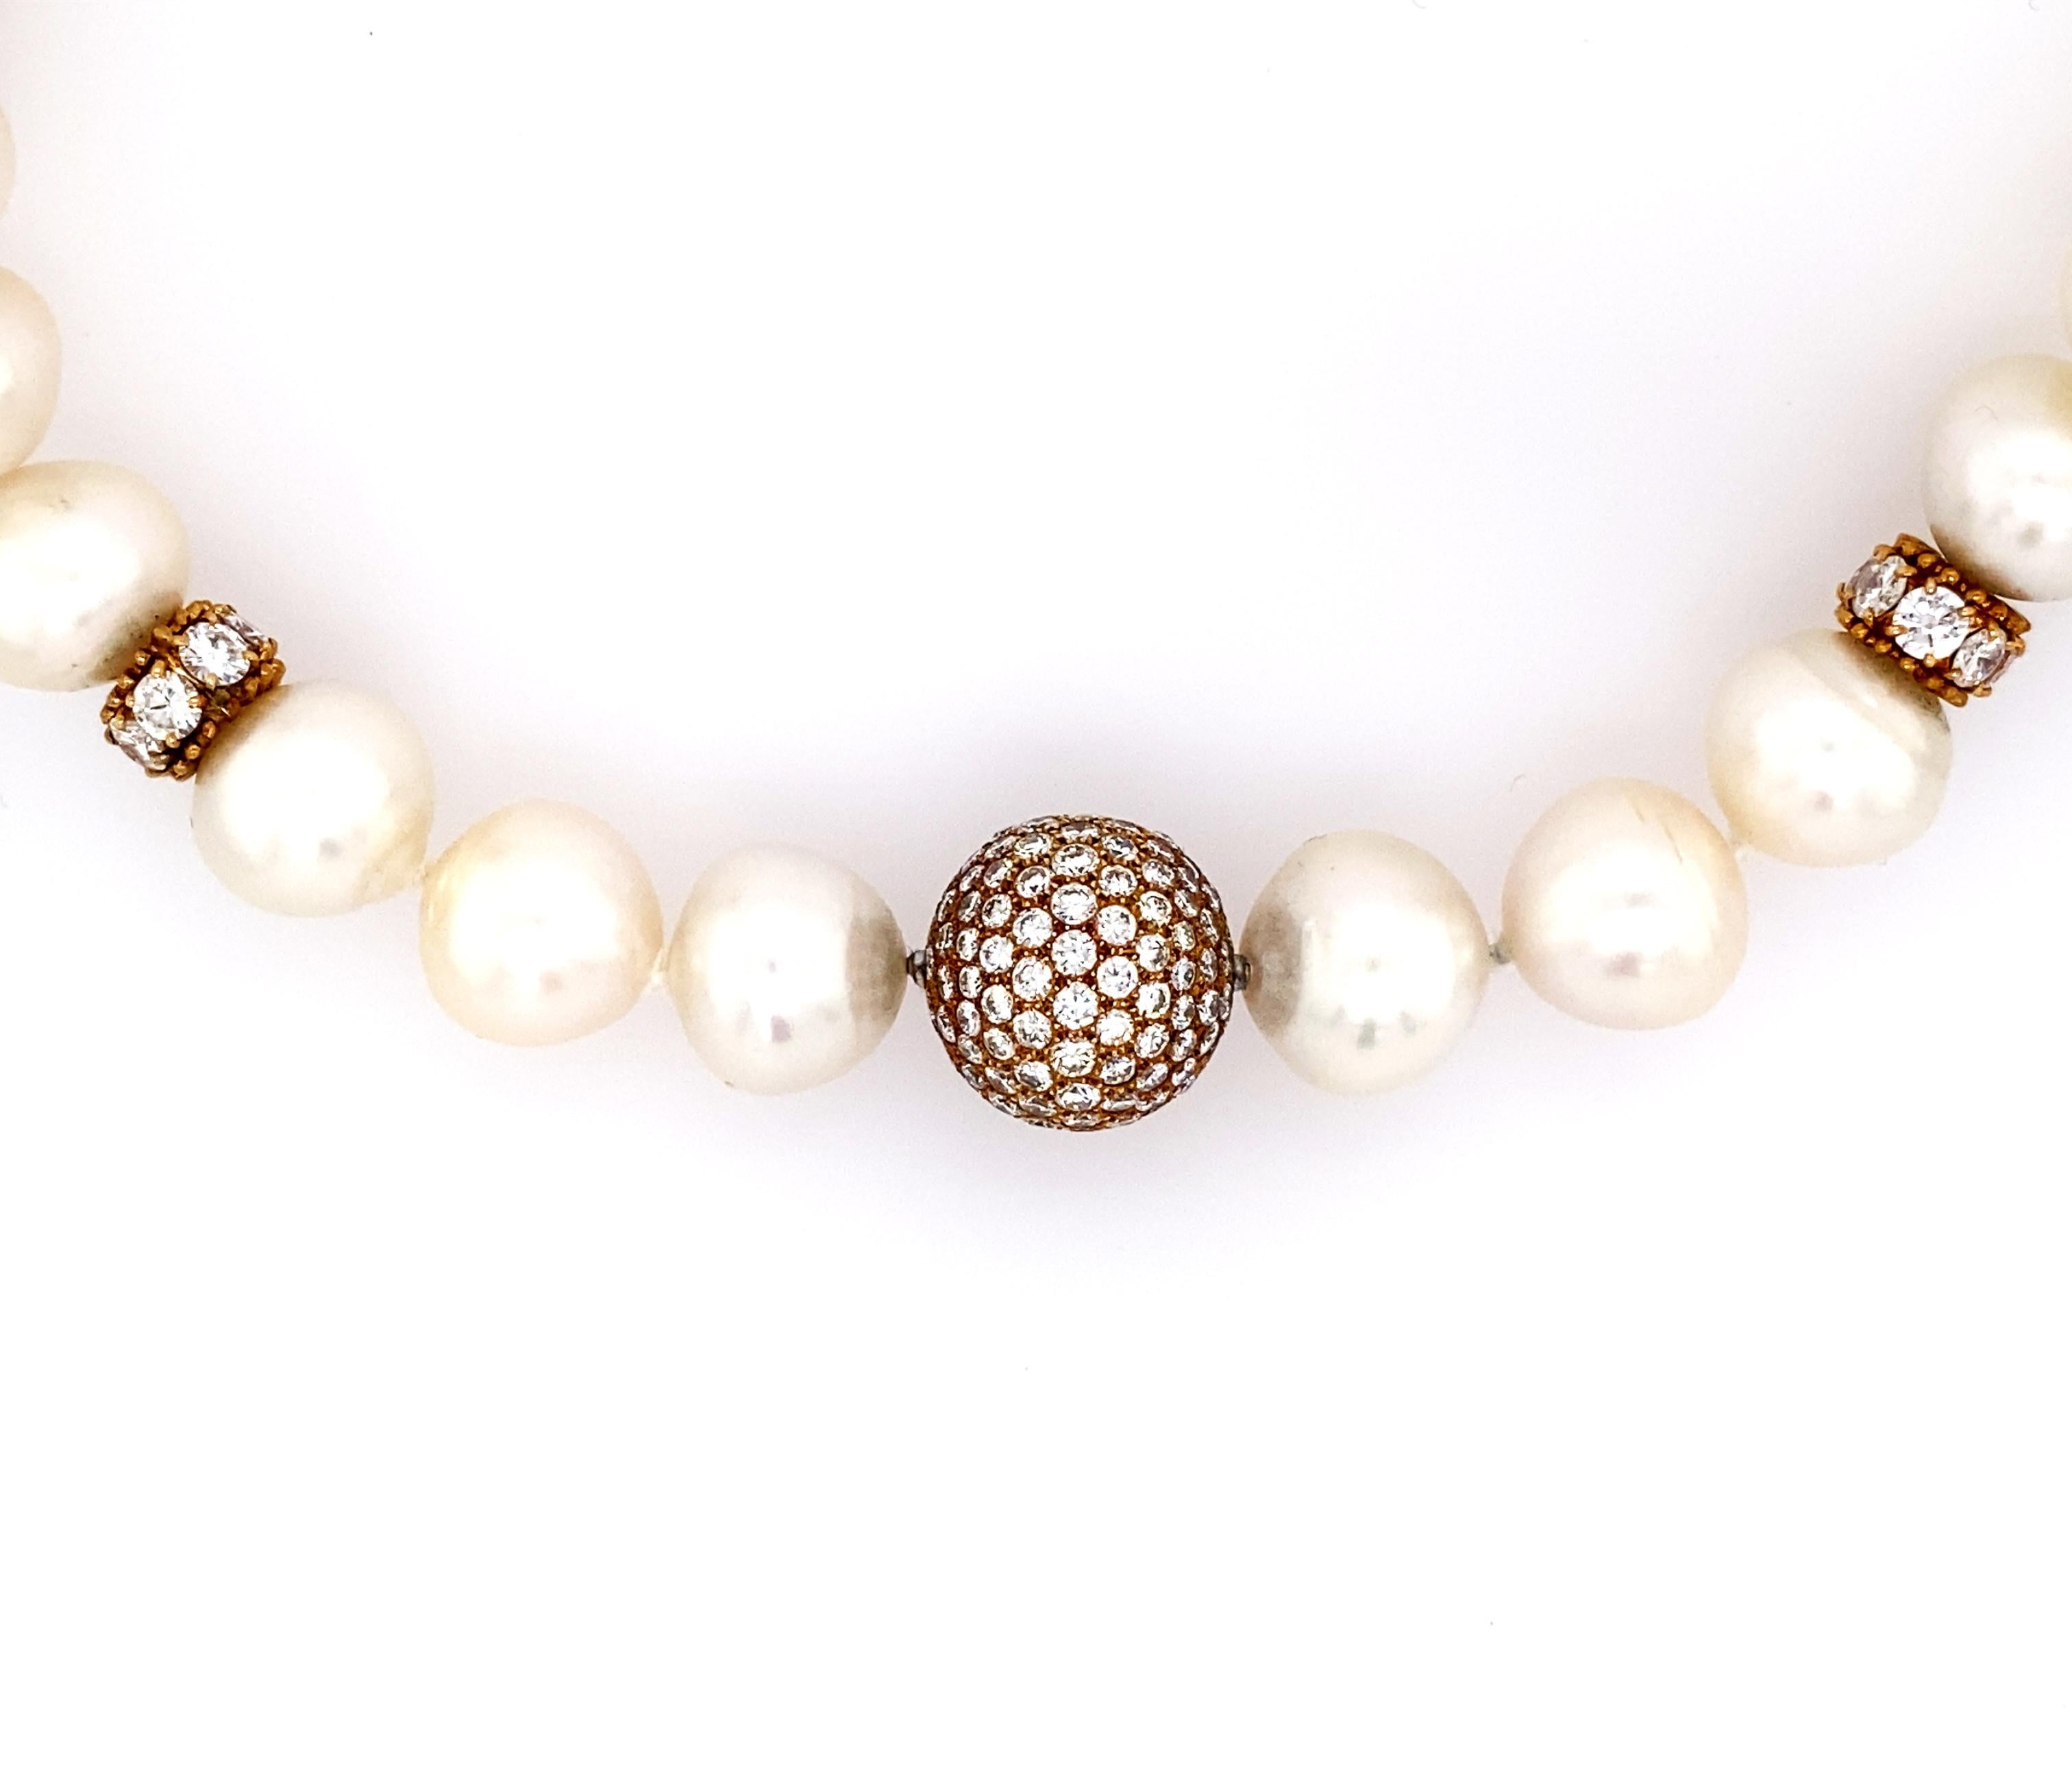 Gold, Semi-Baroque South Sea Cultured Pearl and Diamond Necklace by Van Cleef and Arpels with engraved Serial Number 55610 and certificate of authenticity. 
18k composed of 28 pearls approximately 13.8 to 11.2 mm spaced by eight gold rondelles of